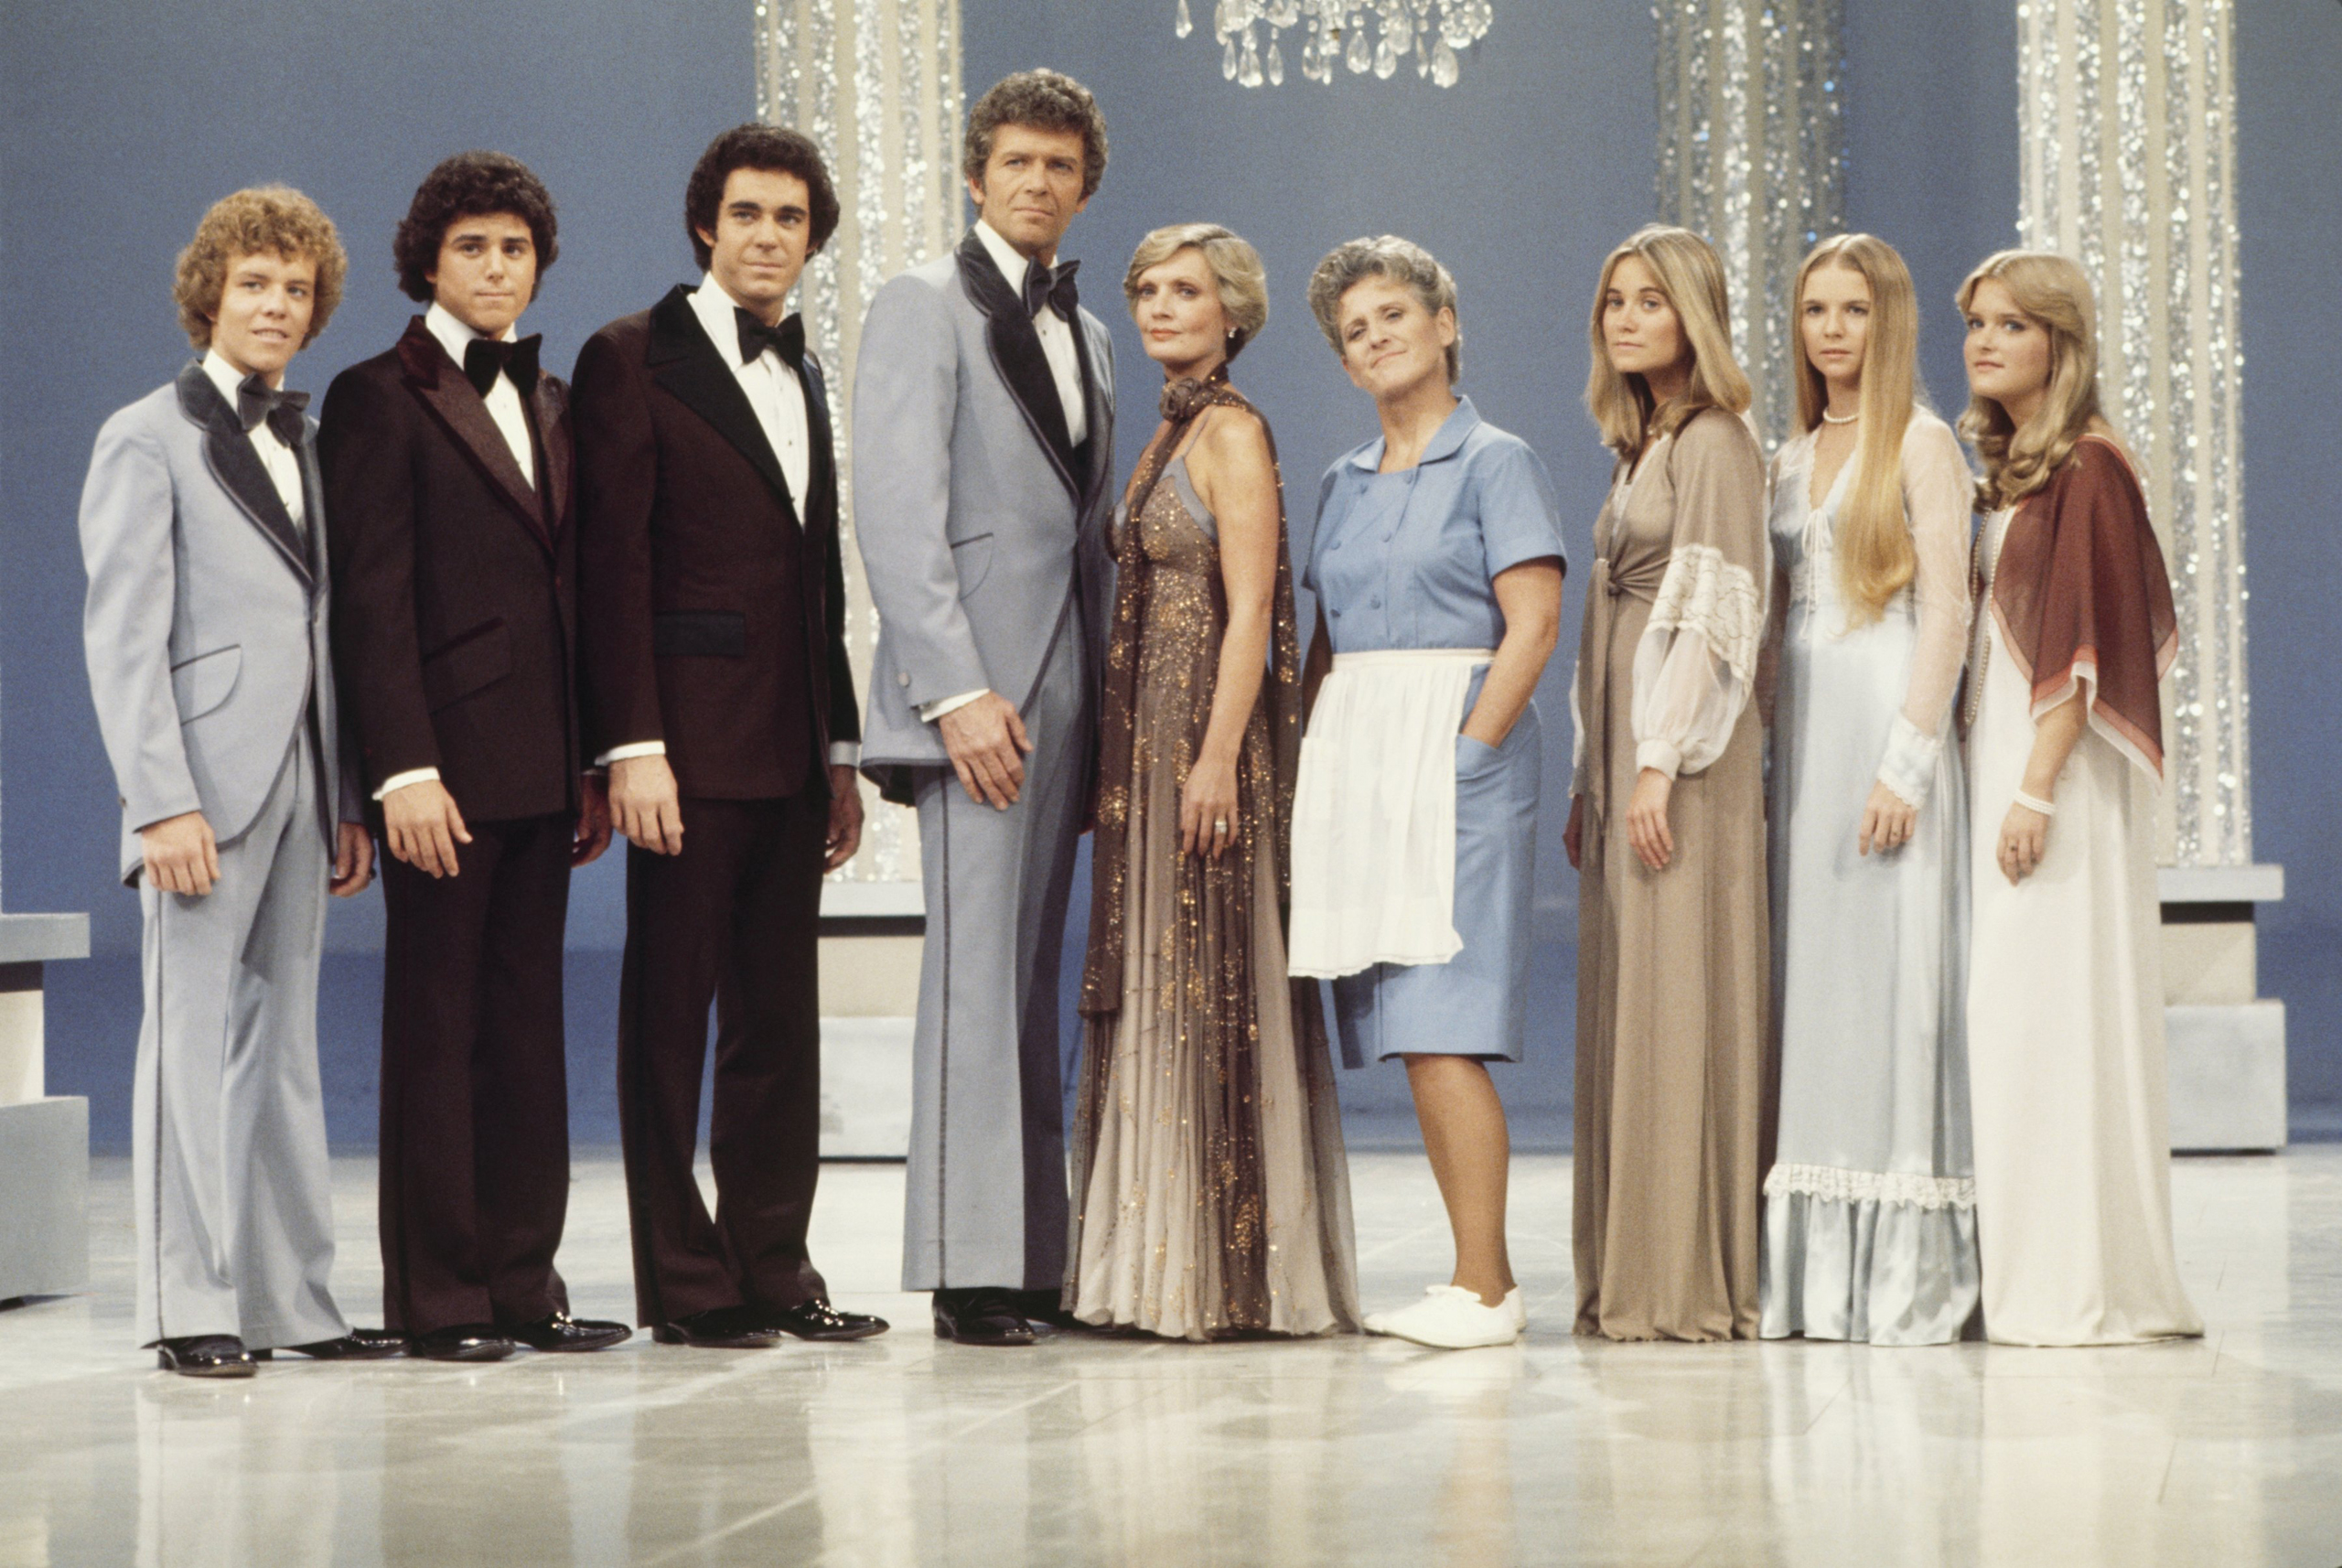 The Brady Bunch Variety Hour in 1976.